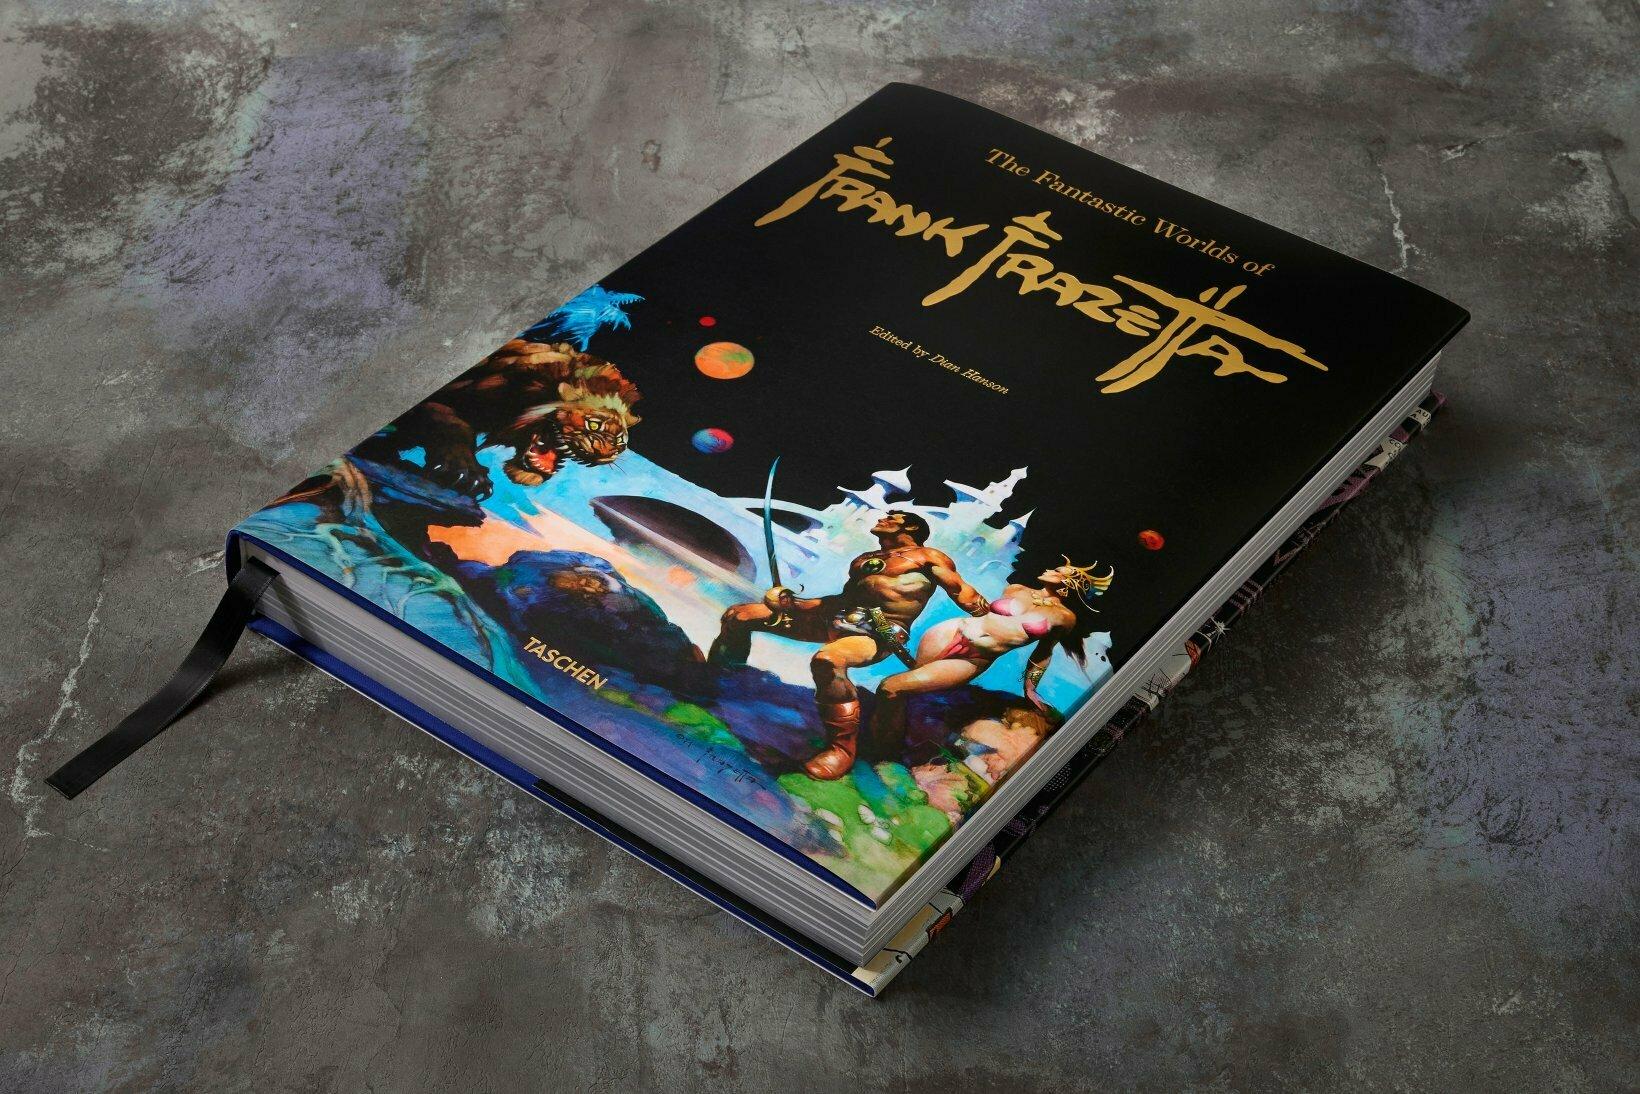 All Hail the King of Fantasy Art.
Frank Frazetta finally gets the big beautiful book he deserves.
Frank Frazetta has reigned as the undisputed lord of fantasy art for 50 years, his fame only growing in the 12 years since his death. With his